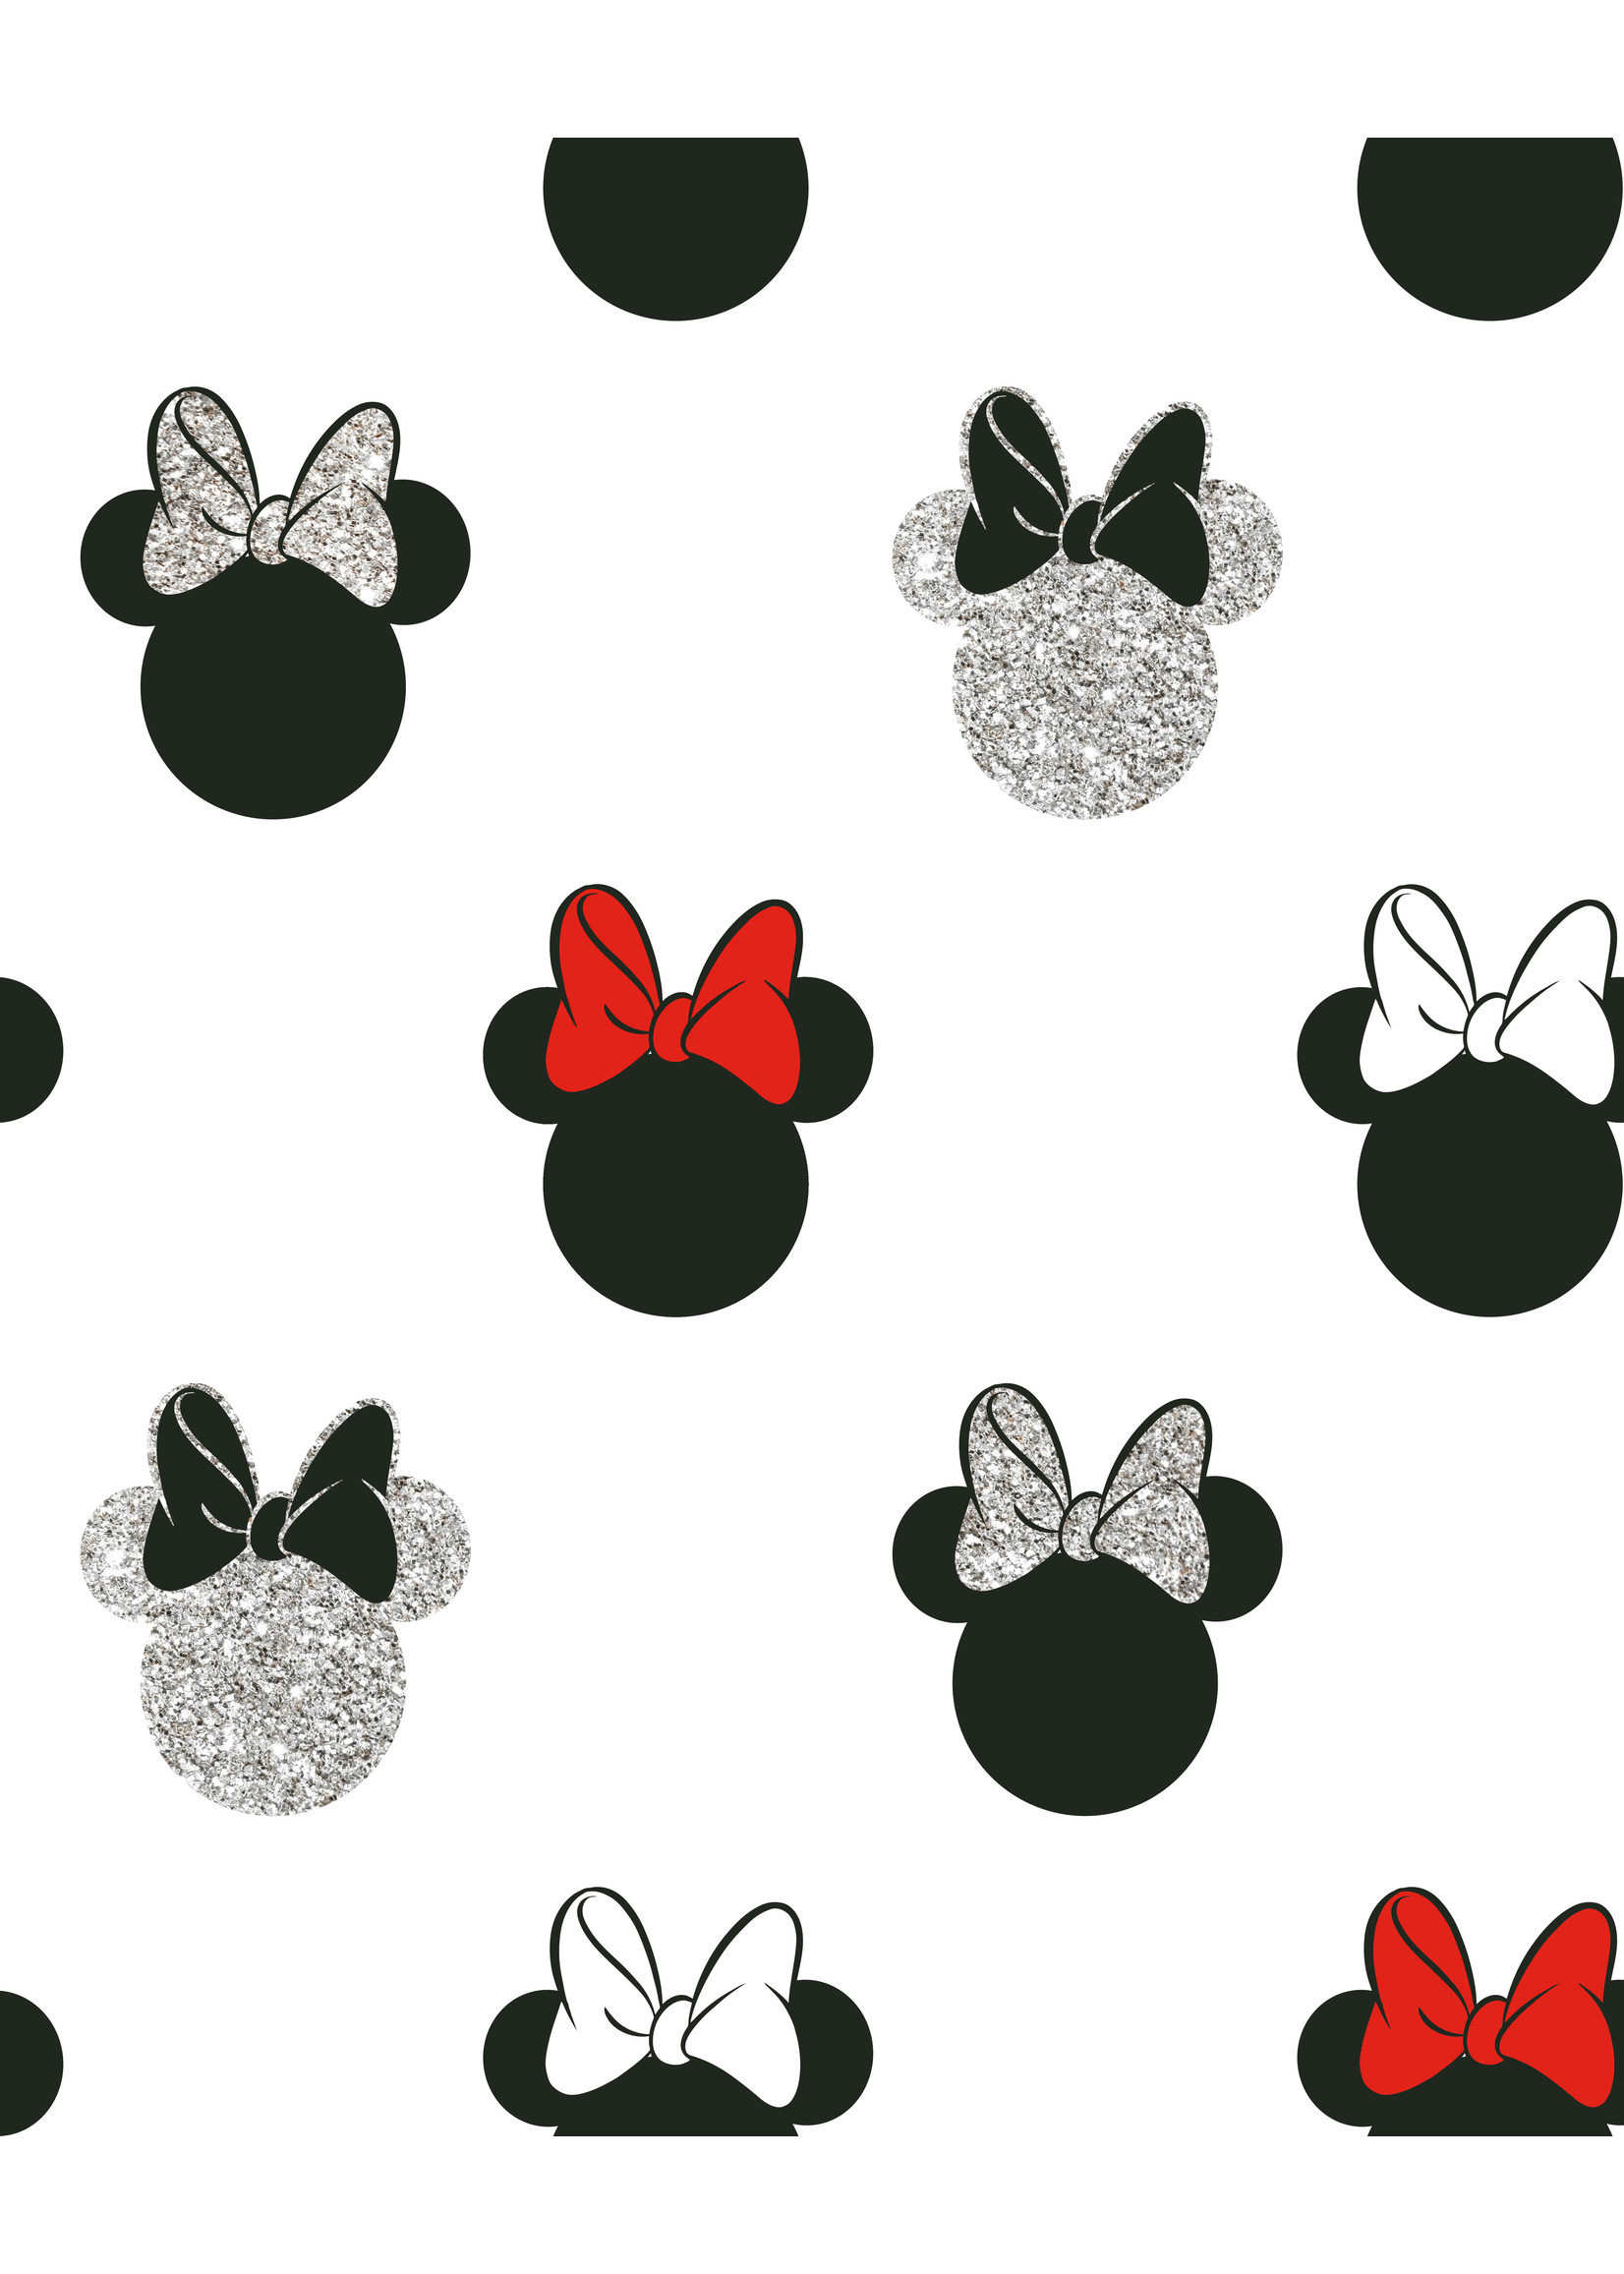 Disney Minnie Mouse Wallpaper with Sparks